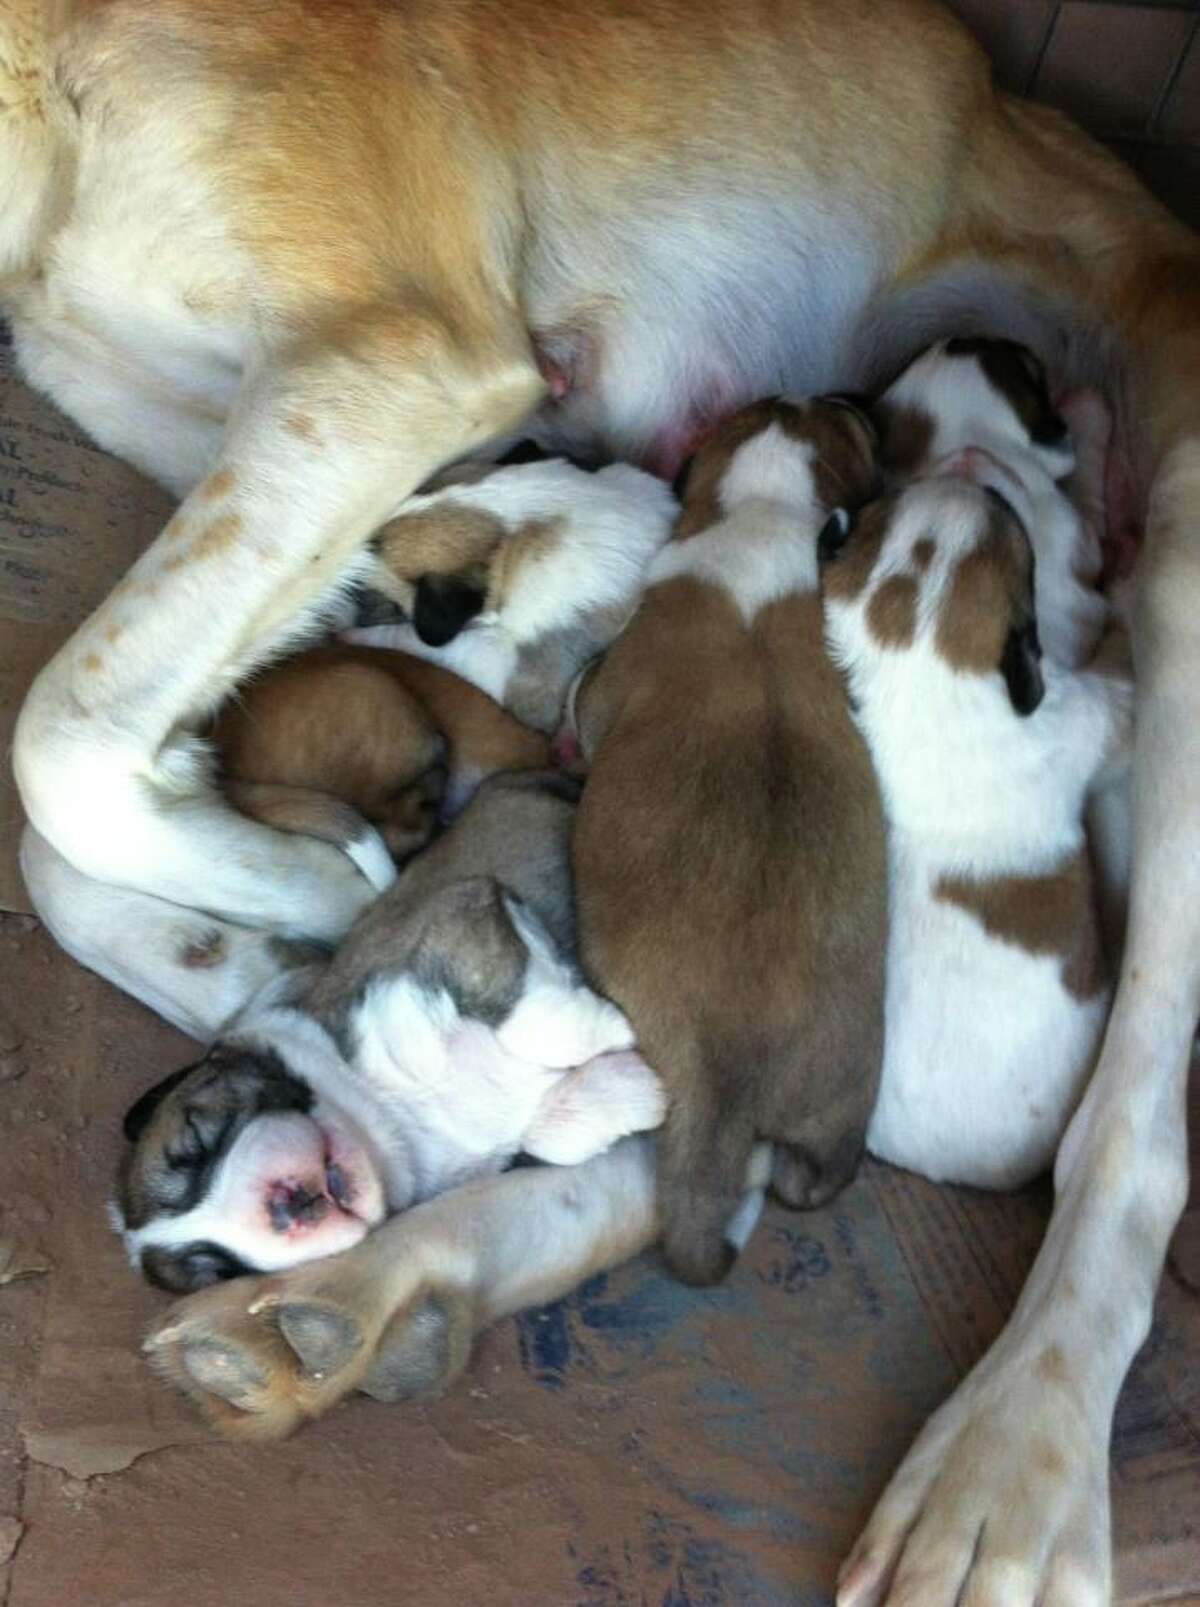 Sheba and her seven puppies in Afghanistan. (Courtesy Maj. Drew Pinckney)